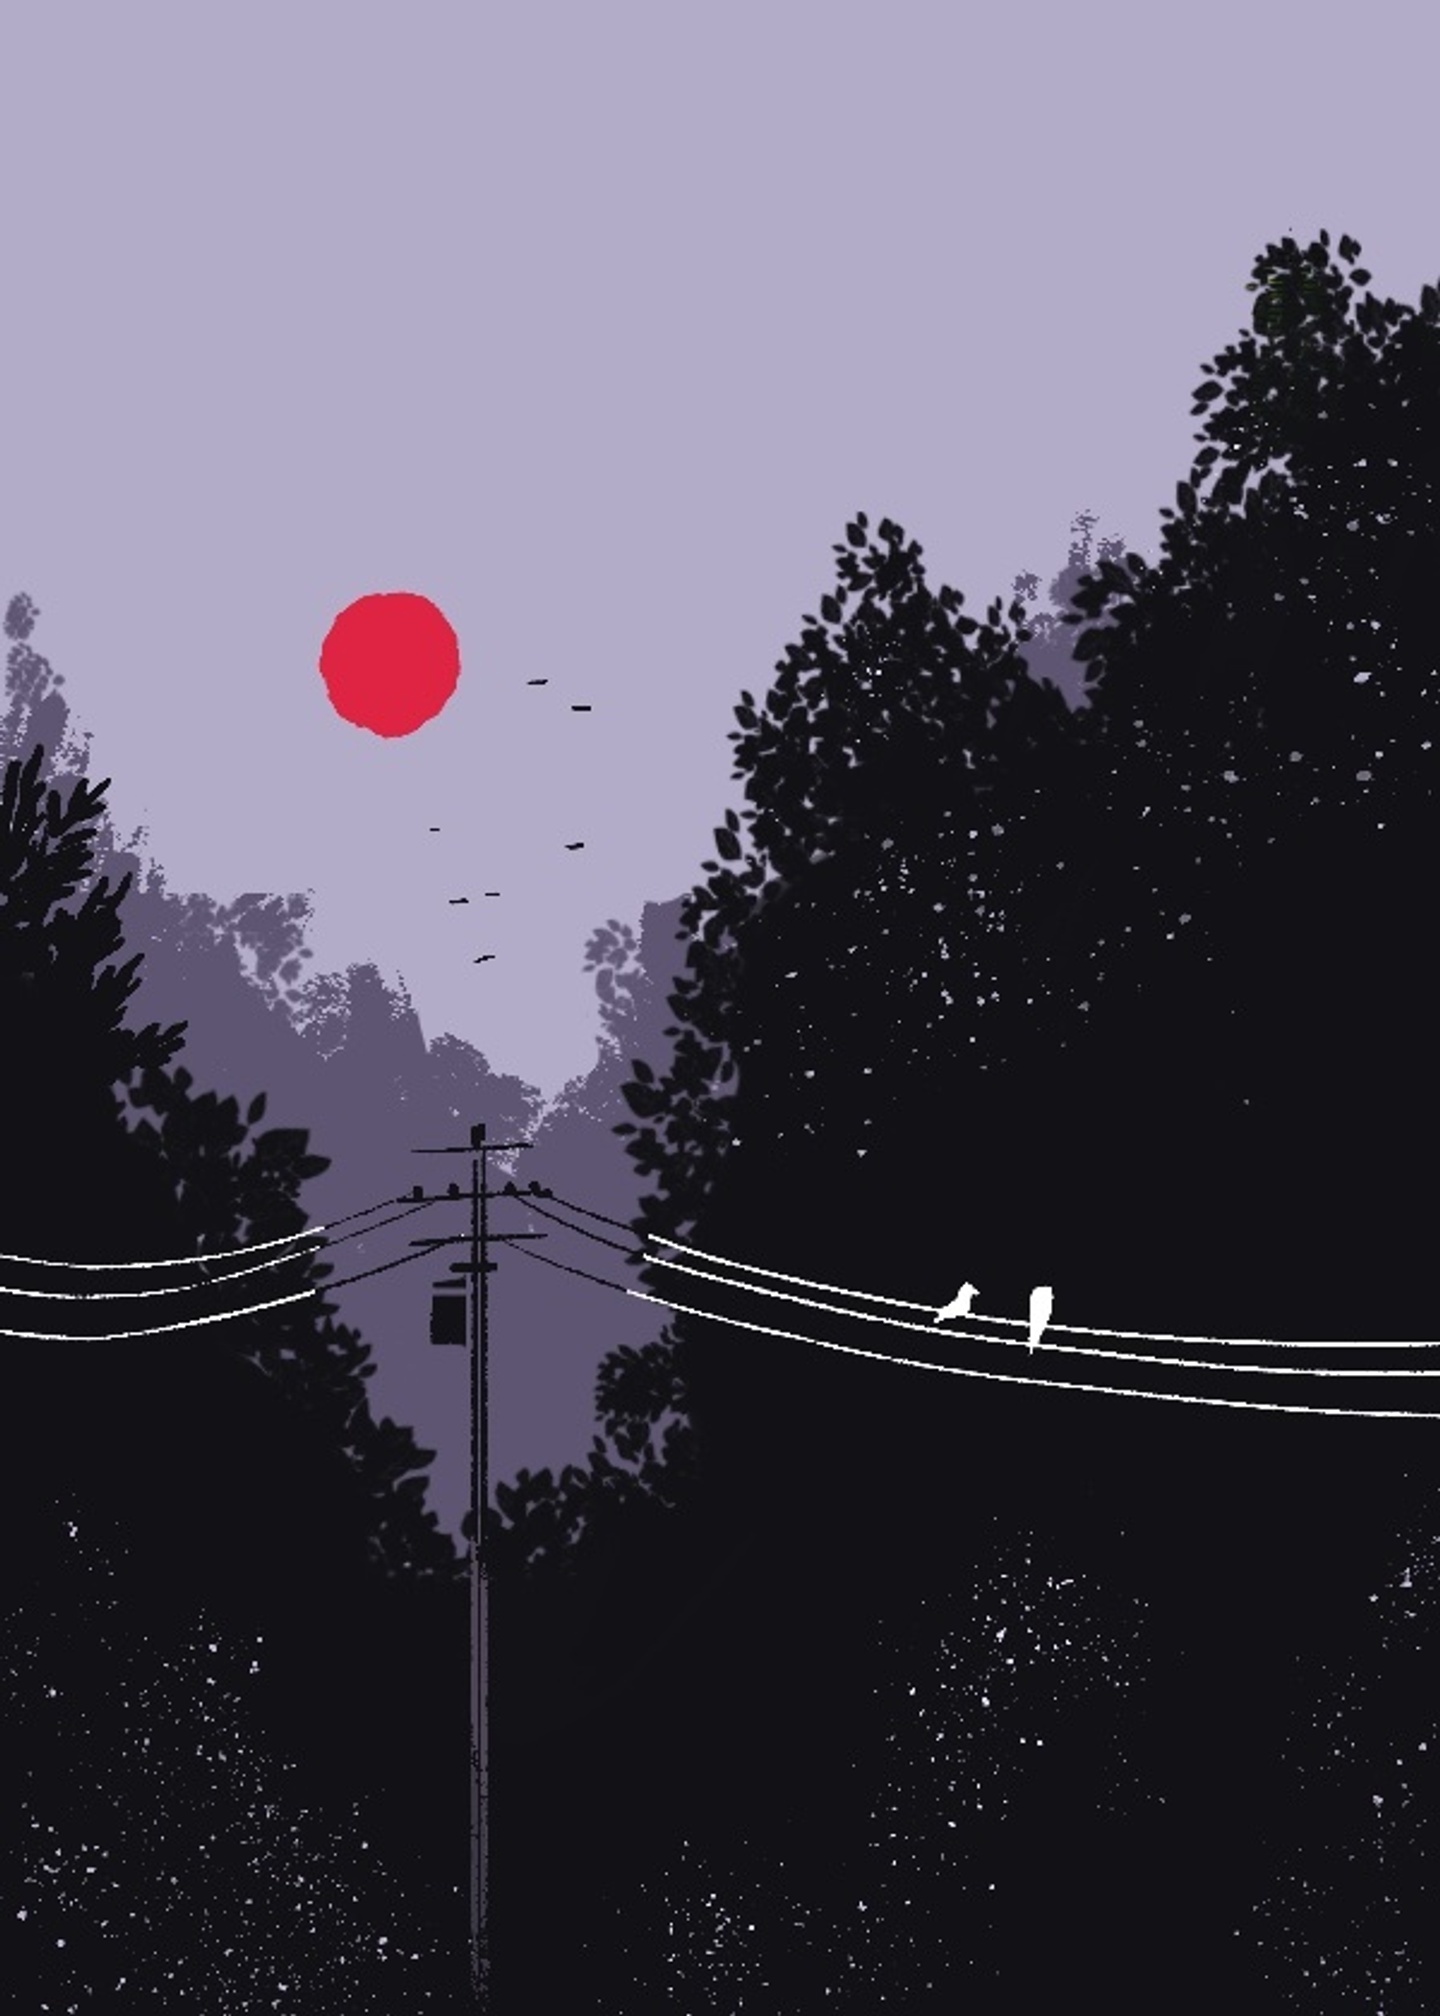 A purply monochromatic illustration of a telephone pole with communication lines. Two birds sit on the cable and a dark orange sun in the distant background